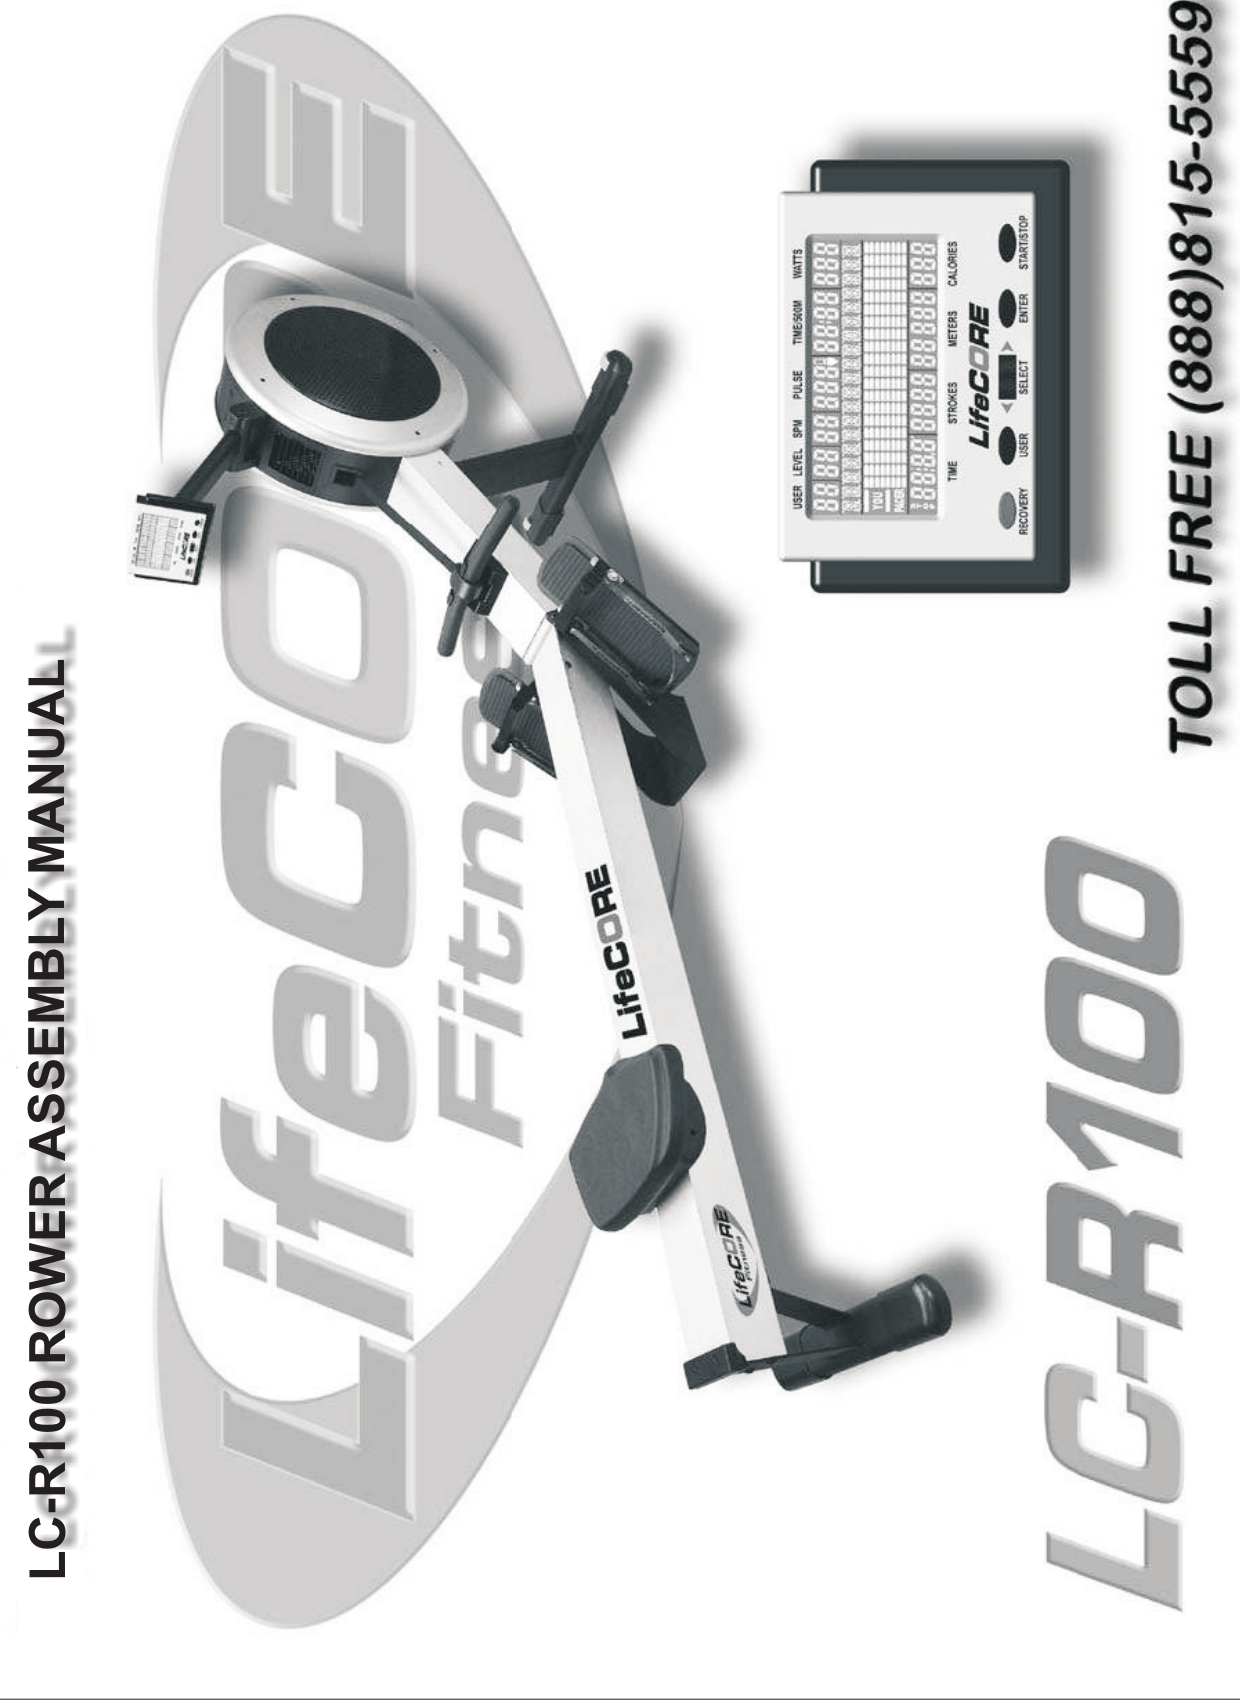 Page 1 of 6 - Lifecore-Fitness Lifecore-Fitness-Lc-R100-Users-Manual- R100APM Premier Rower - Assembly Instructions  Lifecore-fitness-lc-r100-users-manual